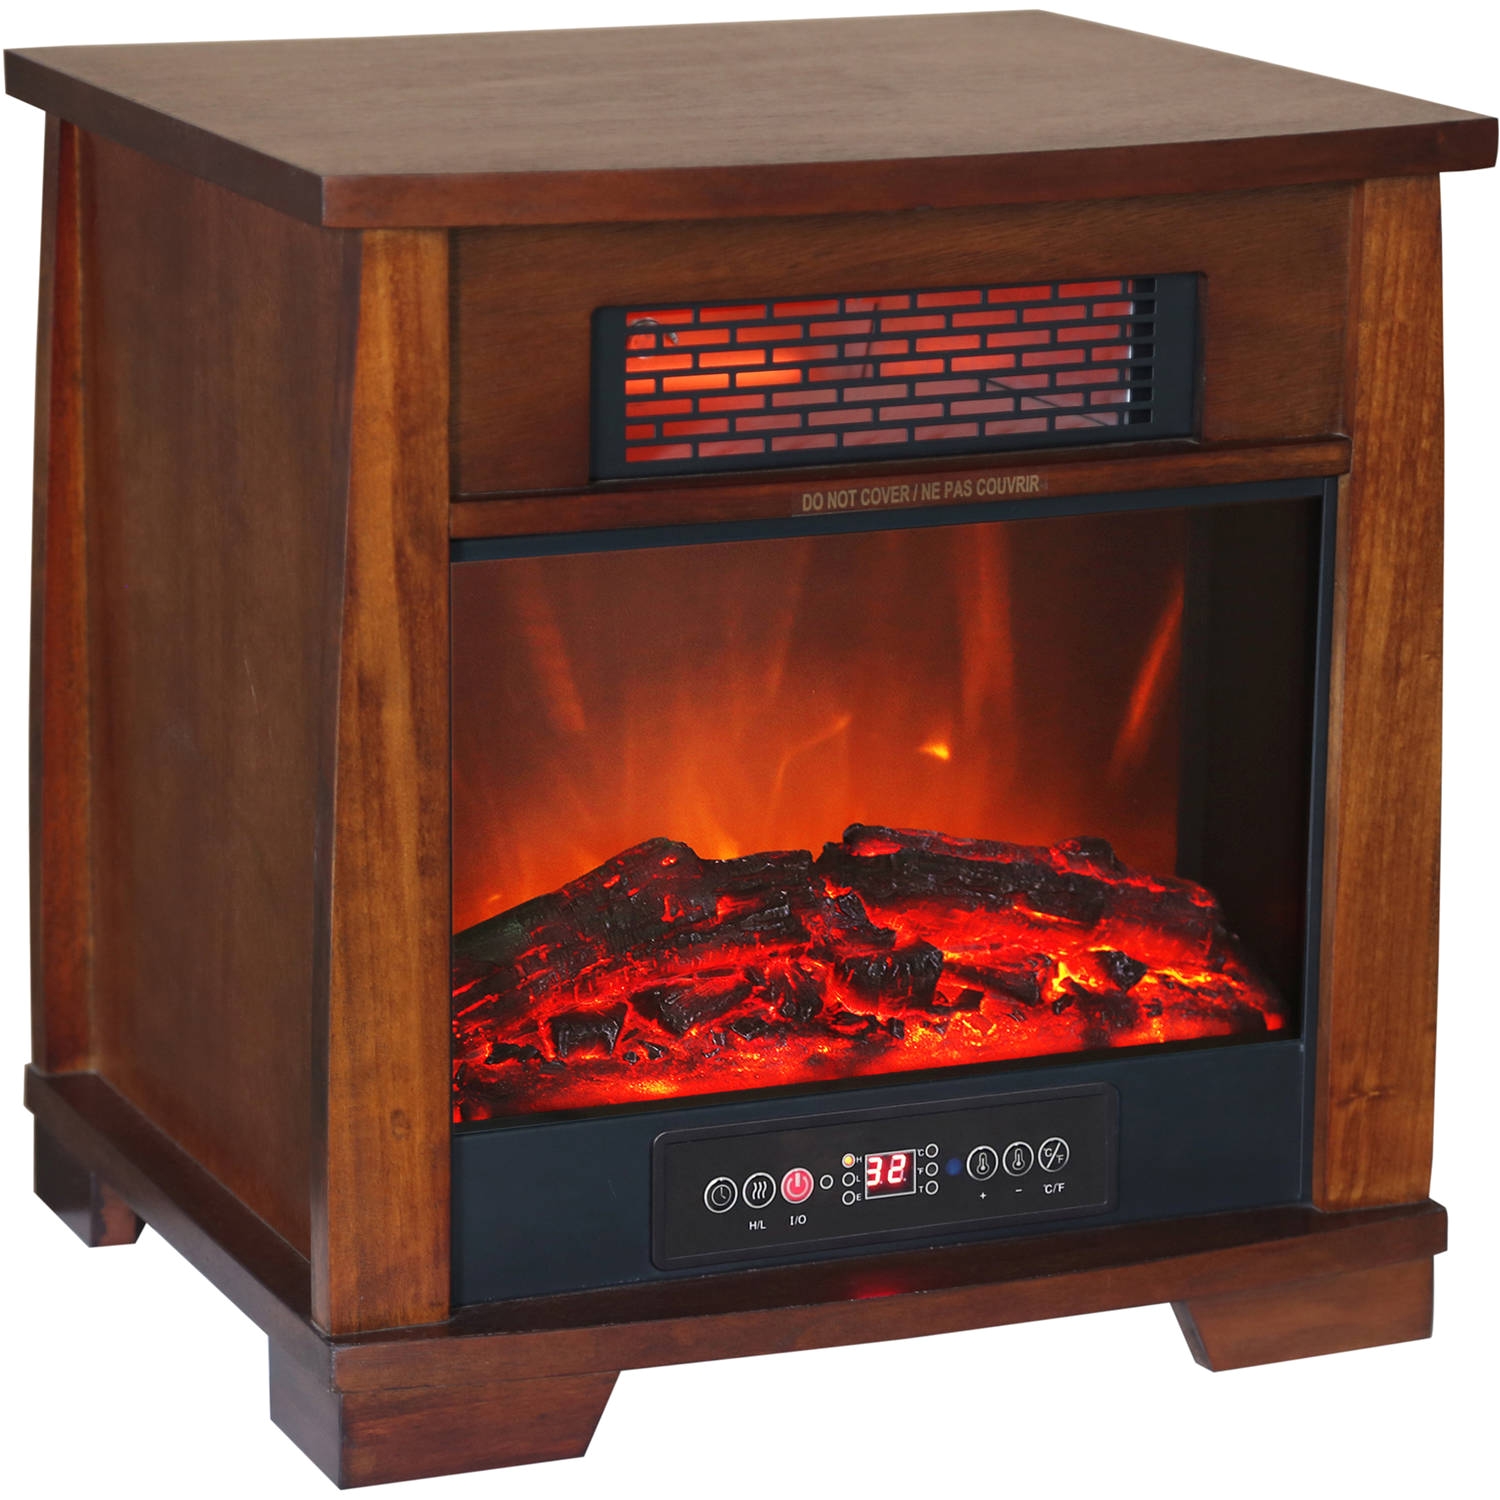 mainstays electric fireplace with 4 element quartz heater heat wave infrared quartz heater with flame effect walmart of mainstays electric fireplace with 4 element quartz heater